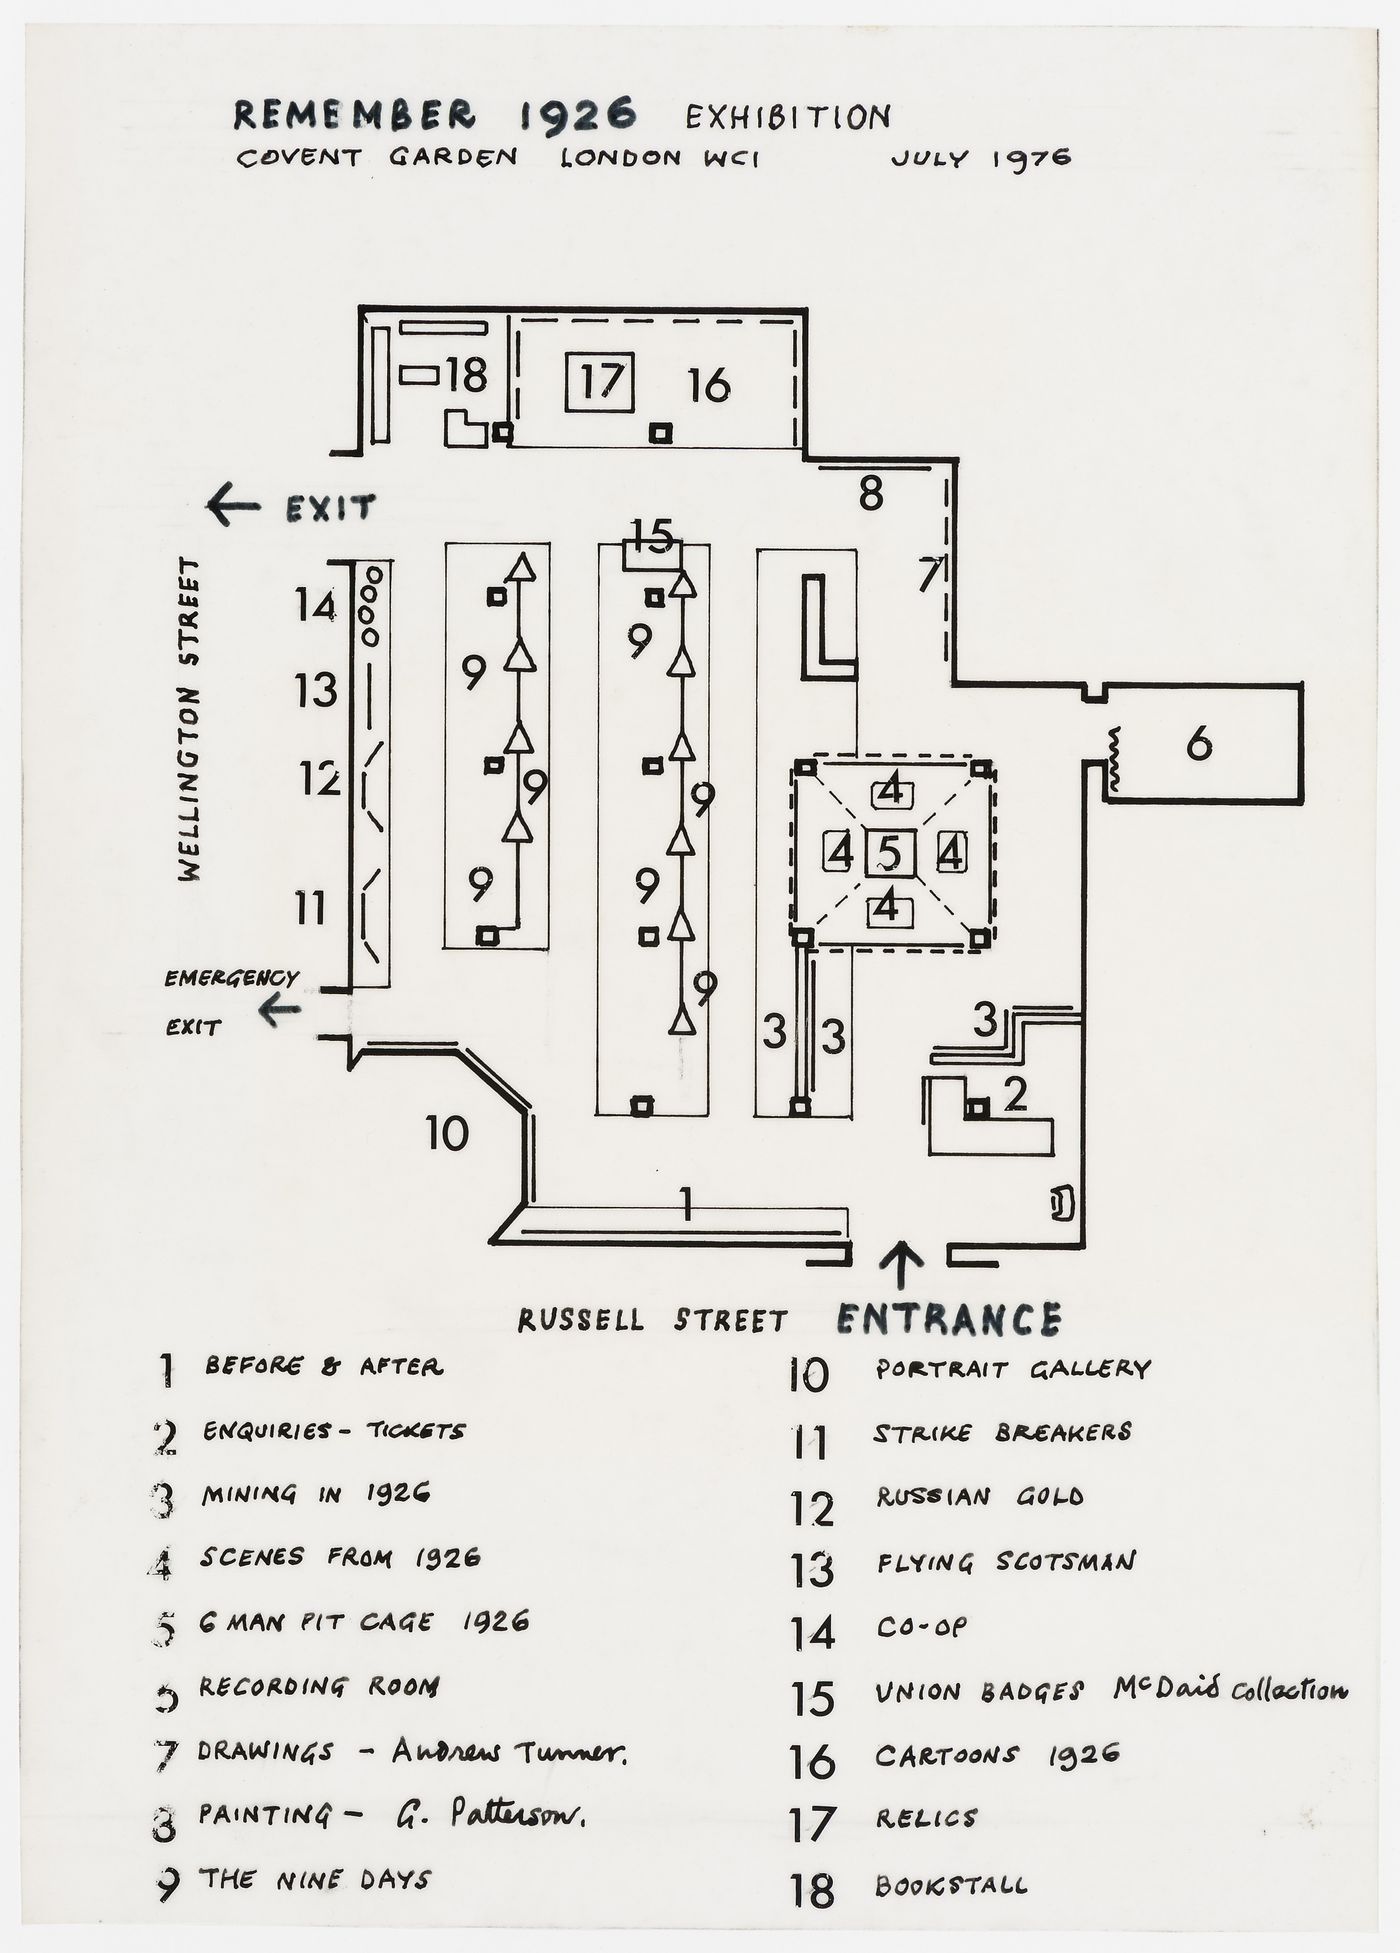 Plan for the "Remember 1926" exhibition